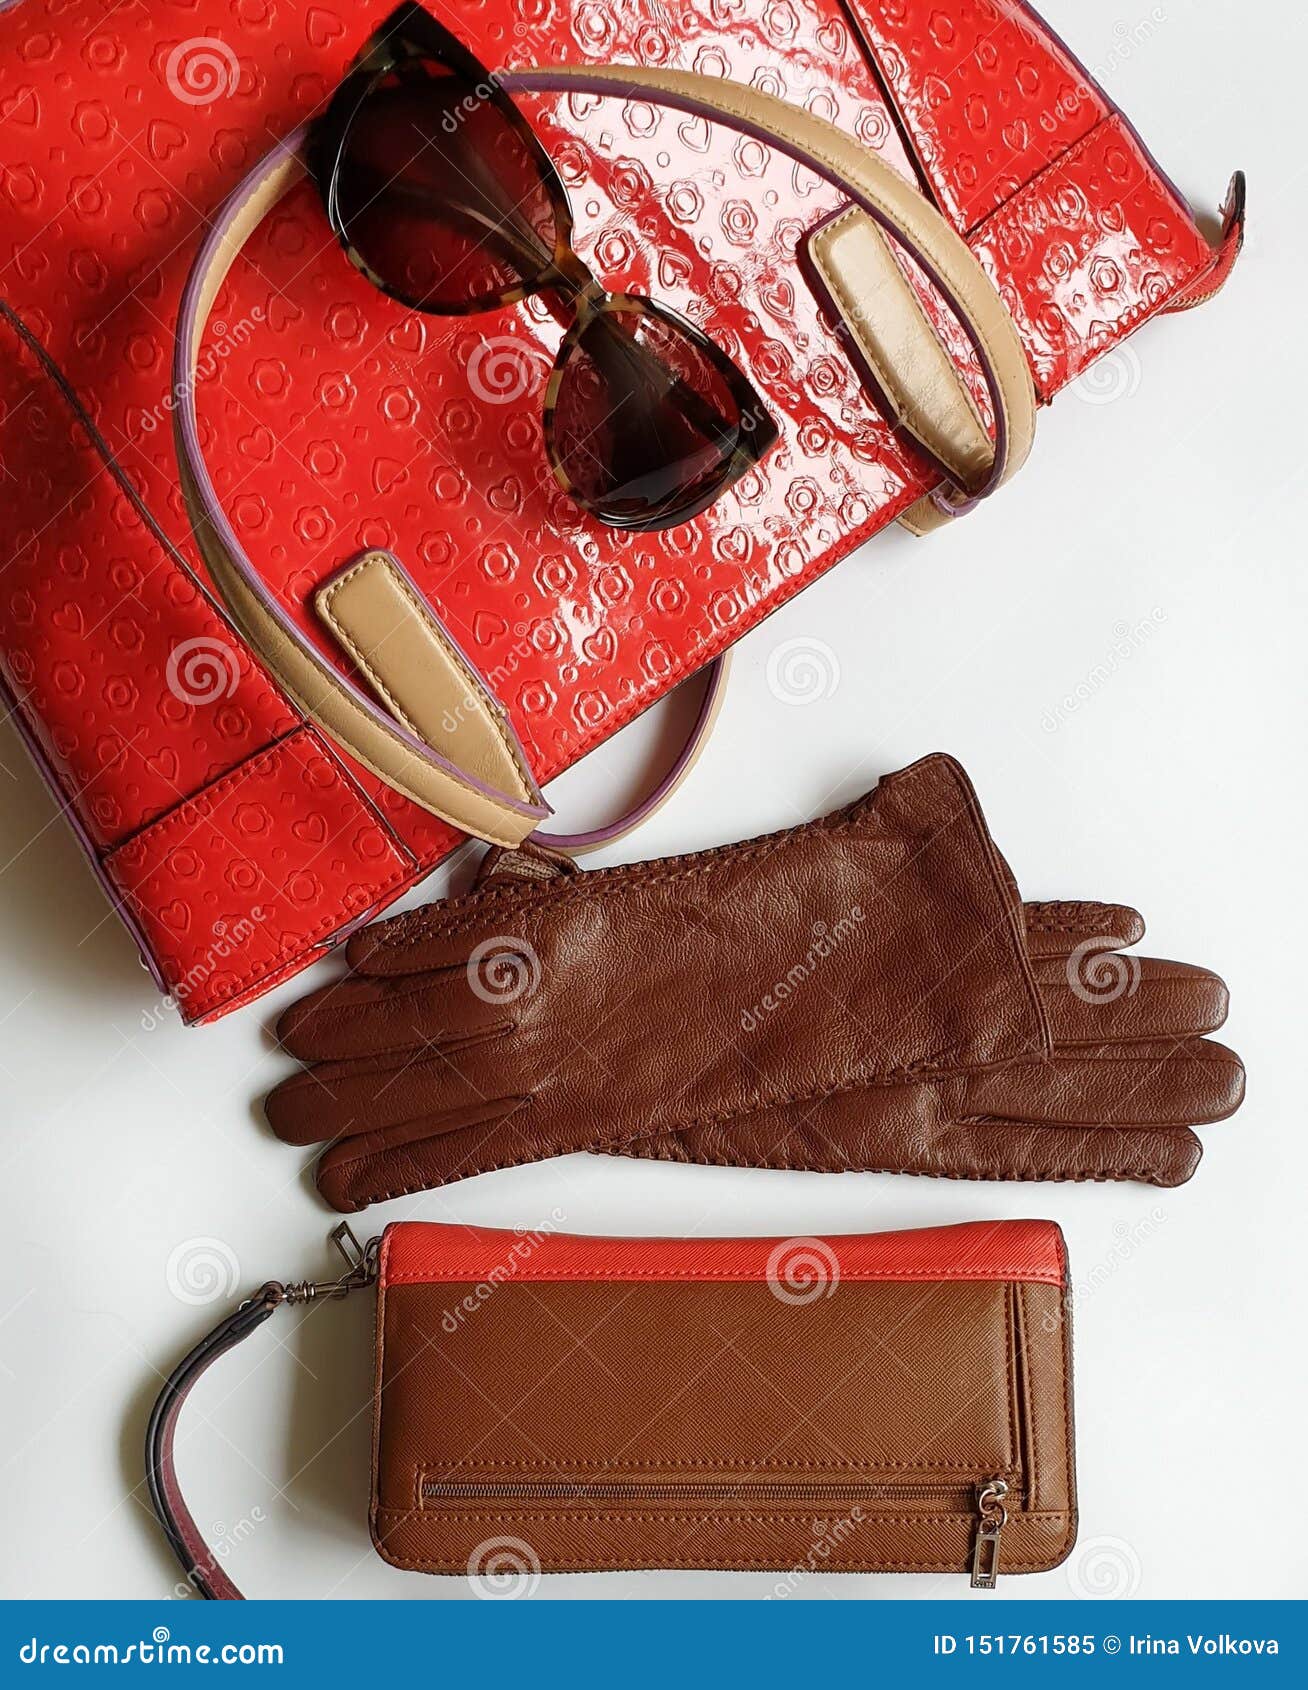 Leather Gloves Sunglasses Style Red Purse Wallet Red Handbag Girl Fas ...